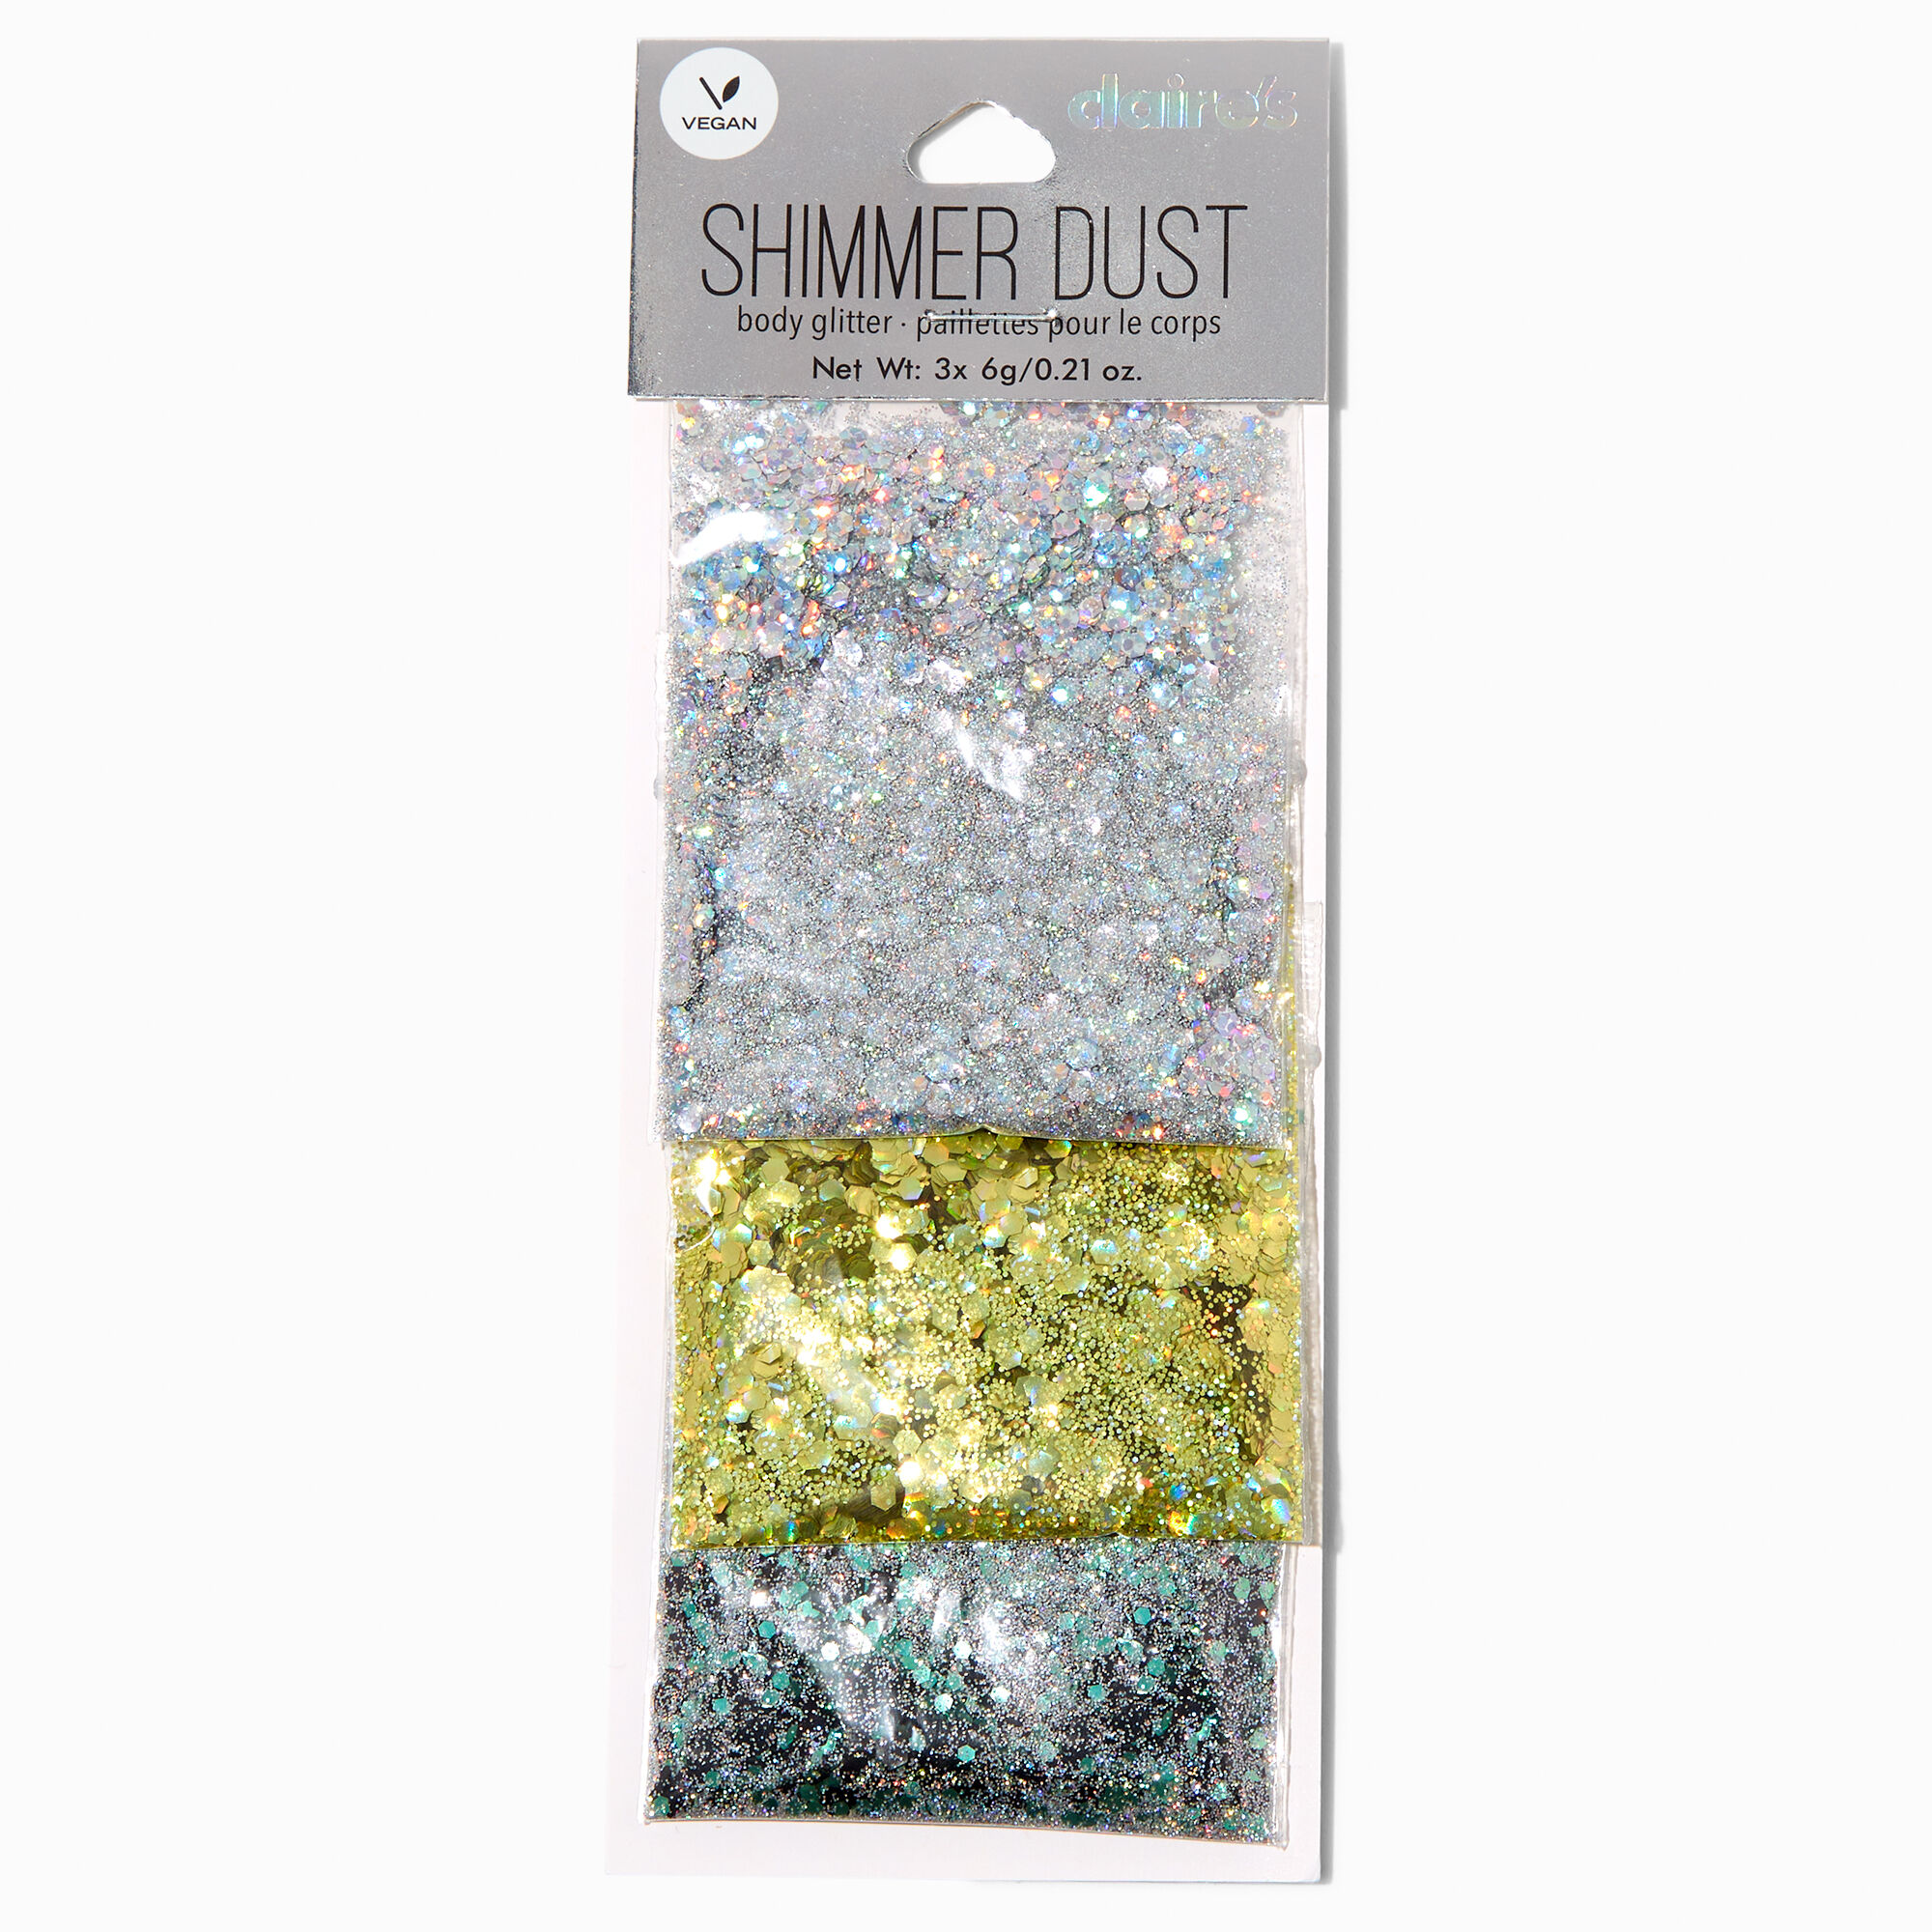 View Claires Metallic Shimmer Dust Vegan Body Glitter 3 Pack Gold information